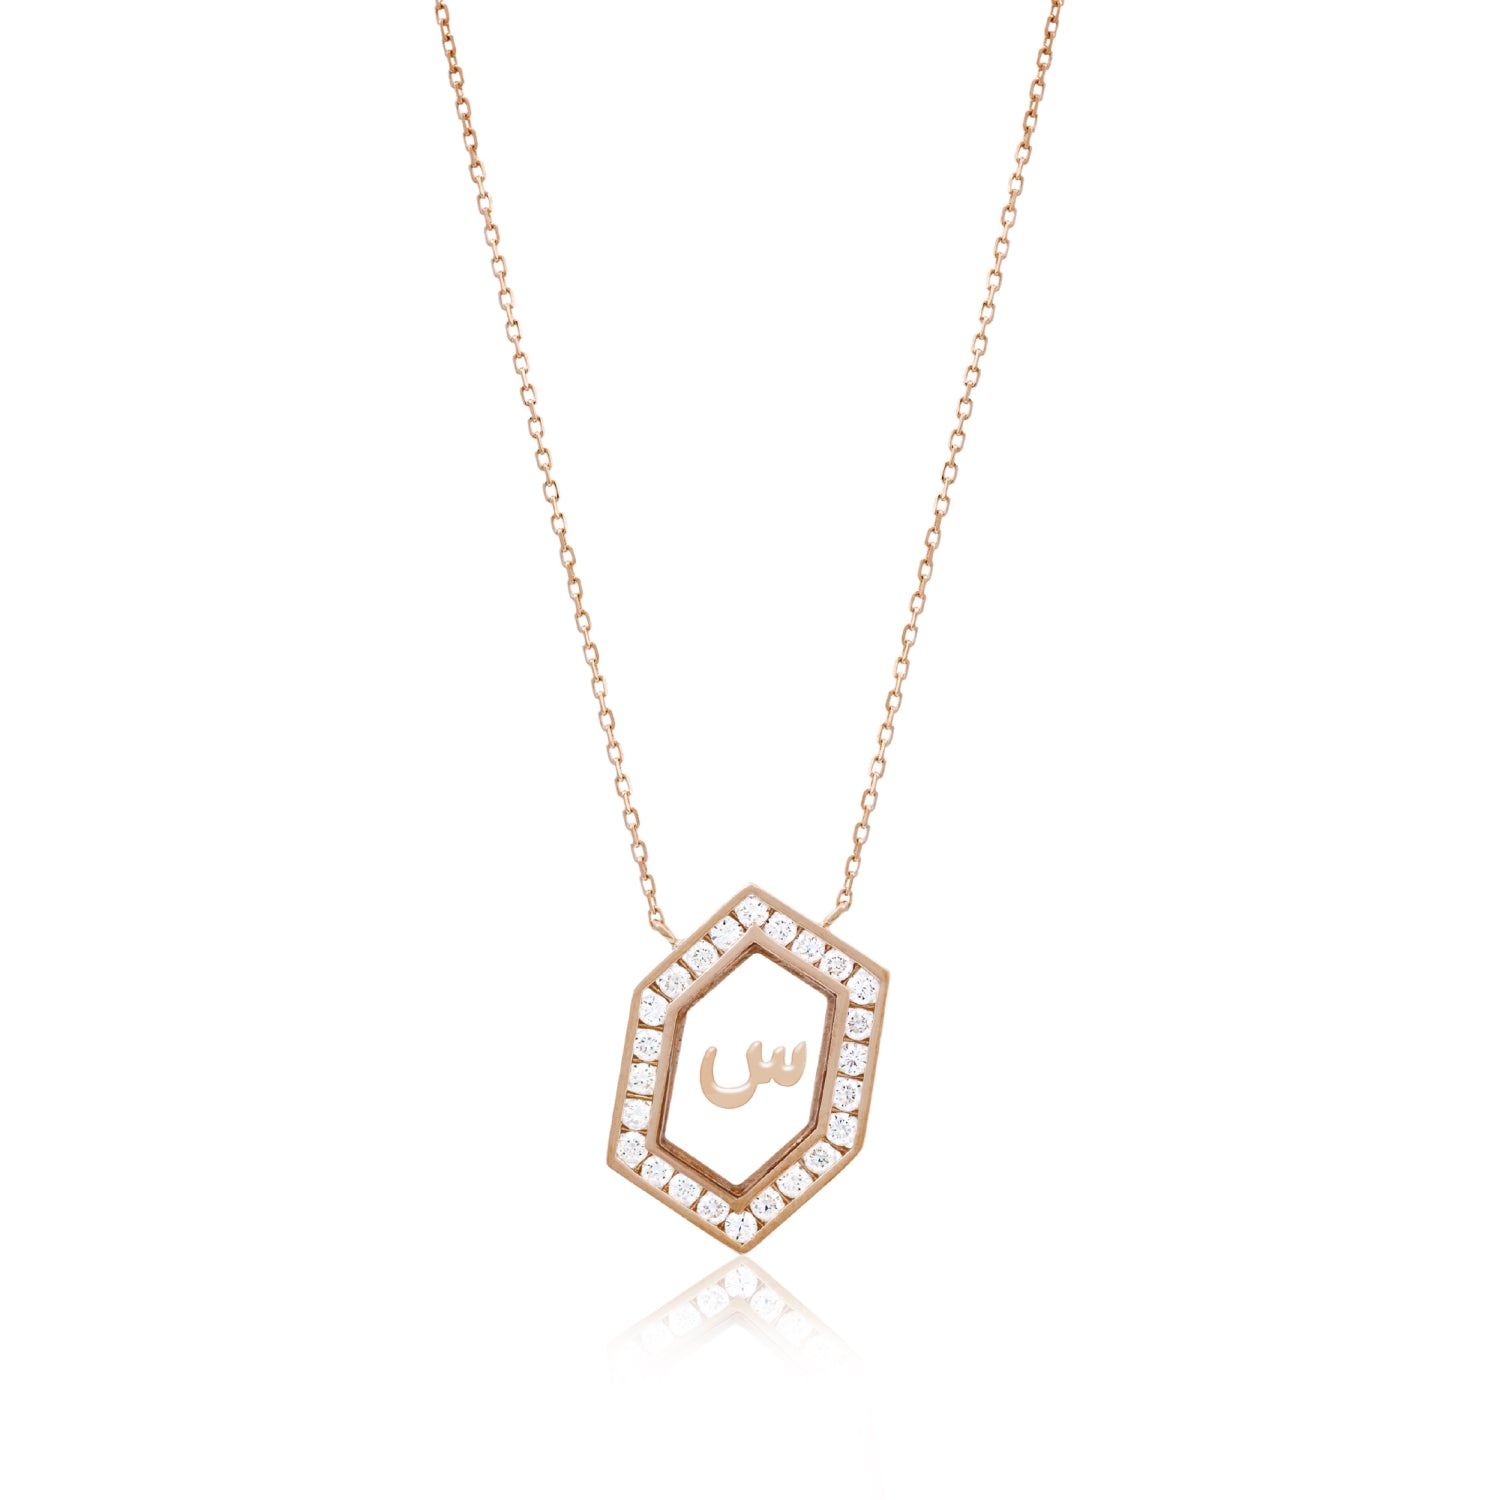 Qamoos 1.0 Letter س Diamond Necklace in Rose Gold